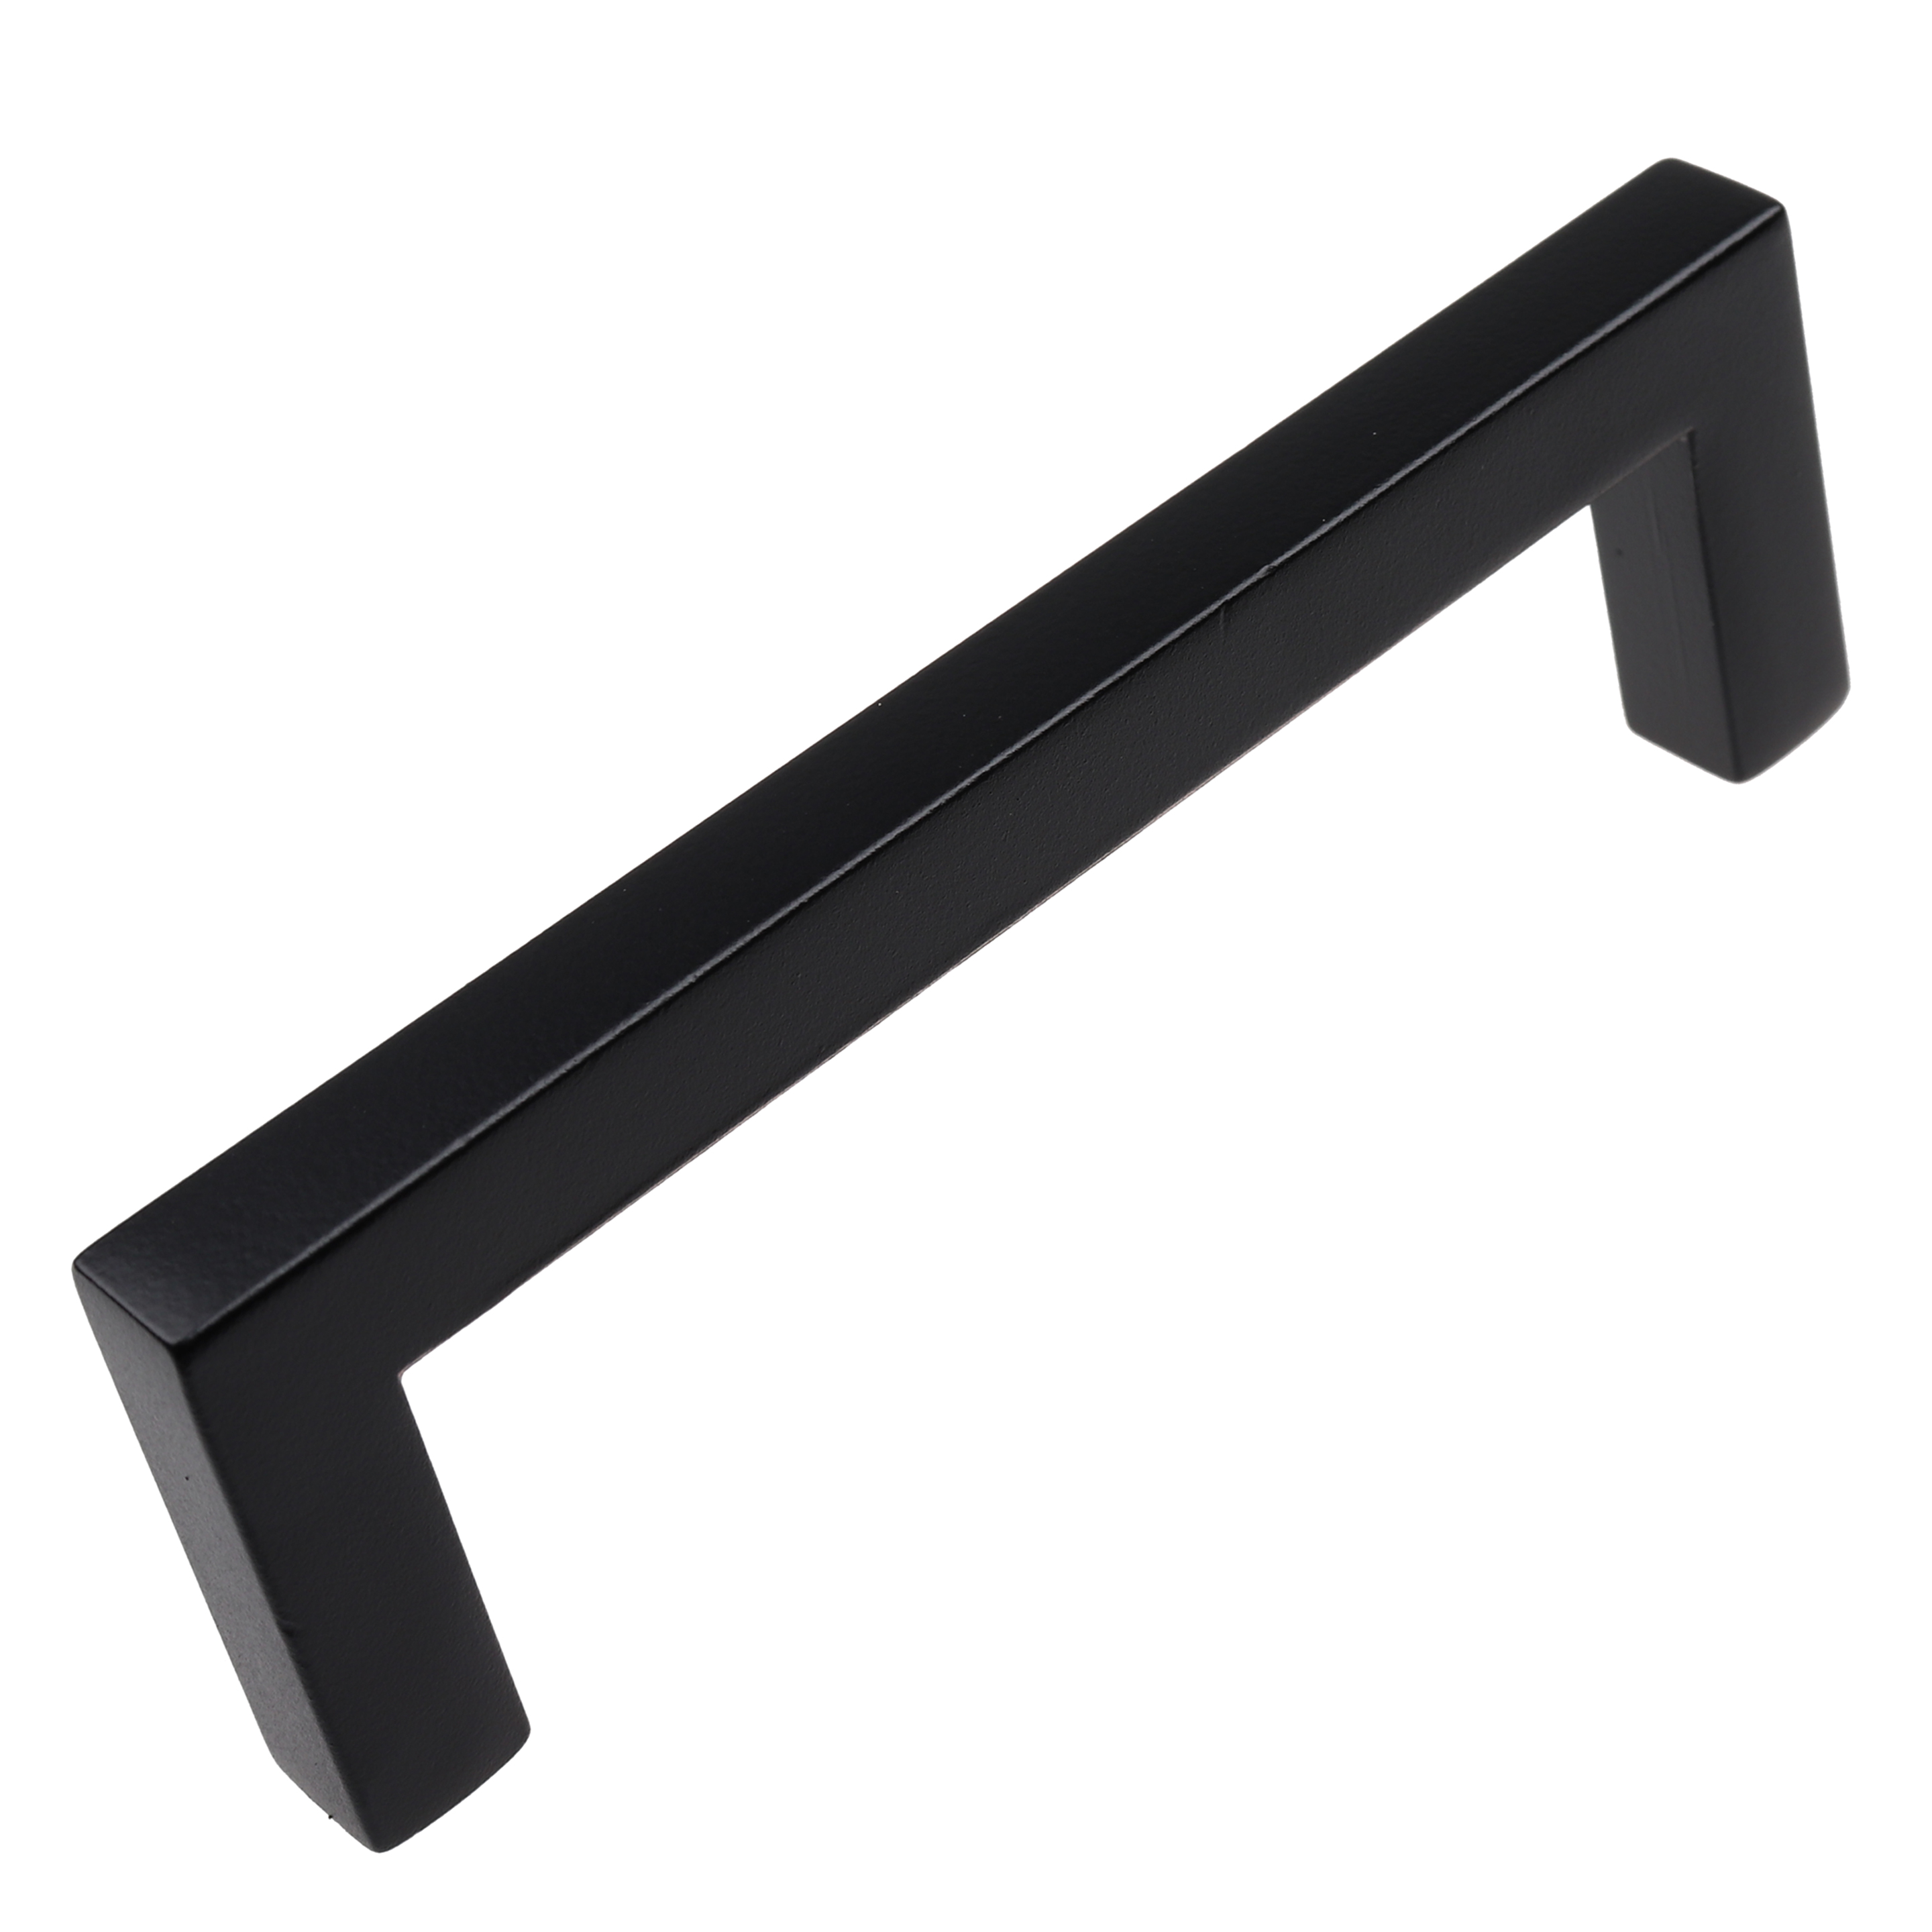 GlideRite 3-3/4 in. Center Solid Square Bar Pull Cabinet Hardware Handles, Matte Black, Pack of 25 - image 1 of 5